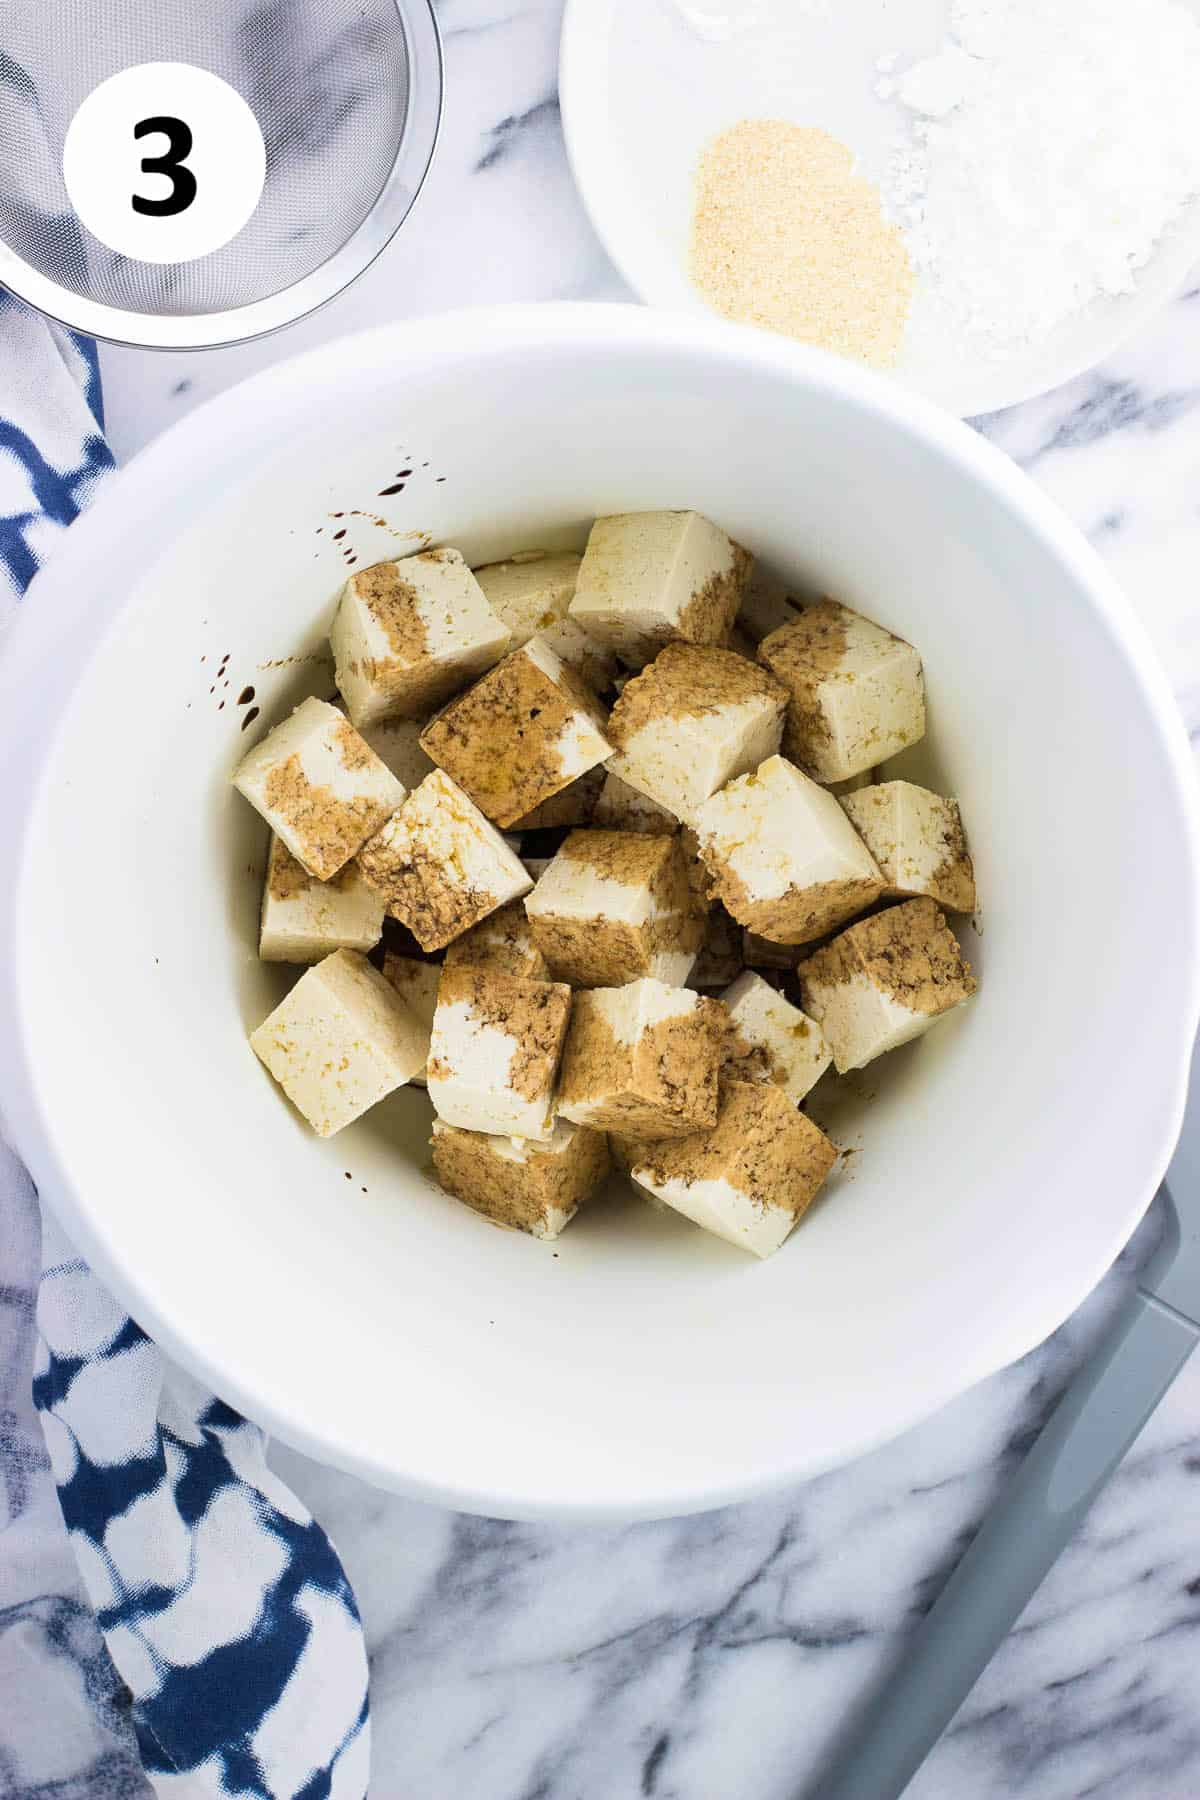 Sesame oil and soy sauce drizzled over the tofu in a bowl.